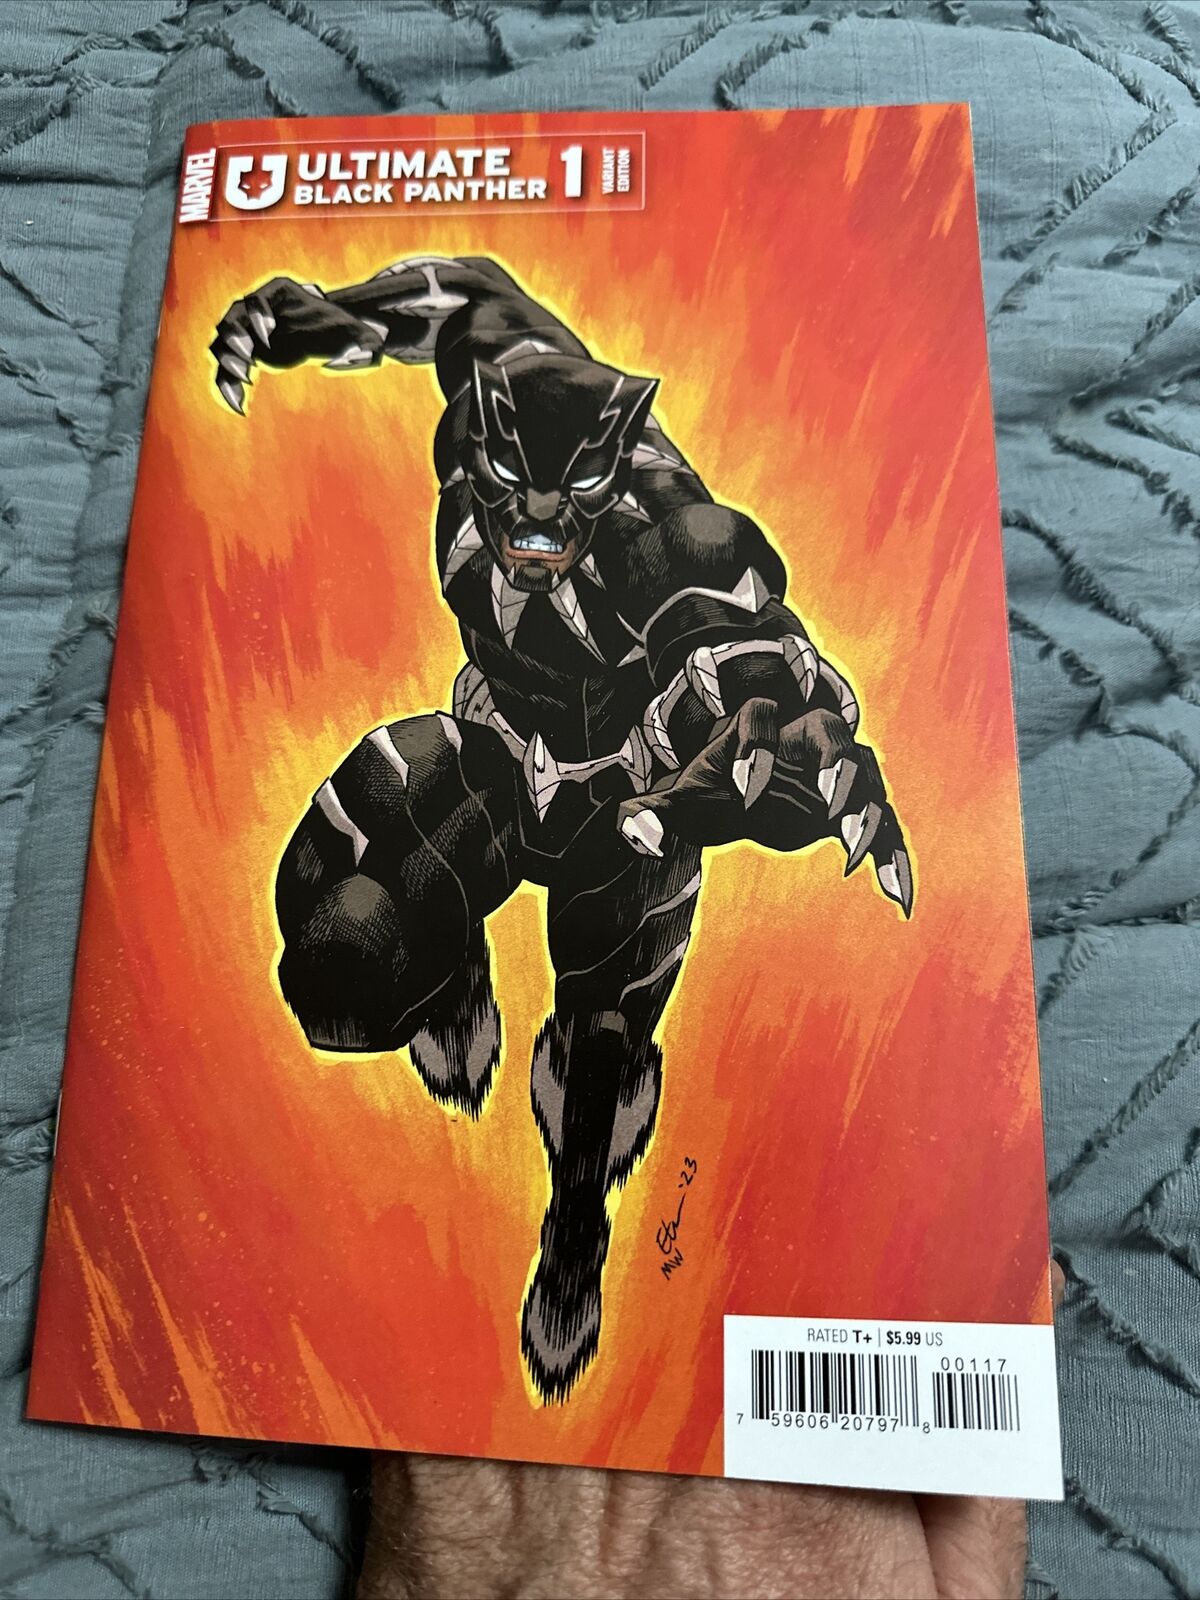 ULTIMATE BLACK PANTHER #1 1:25 INCENTIVE ETHAN YOUNG VARIANT 1st PRINT🔥🔥🔥